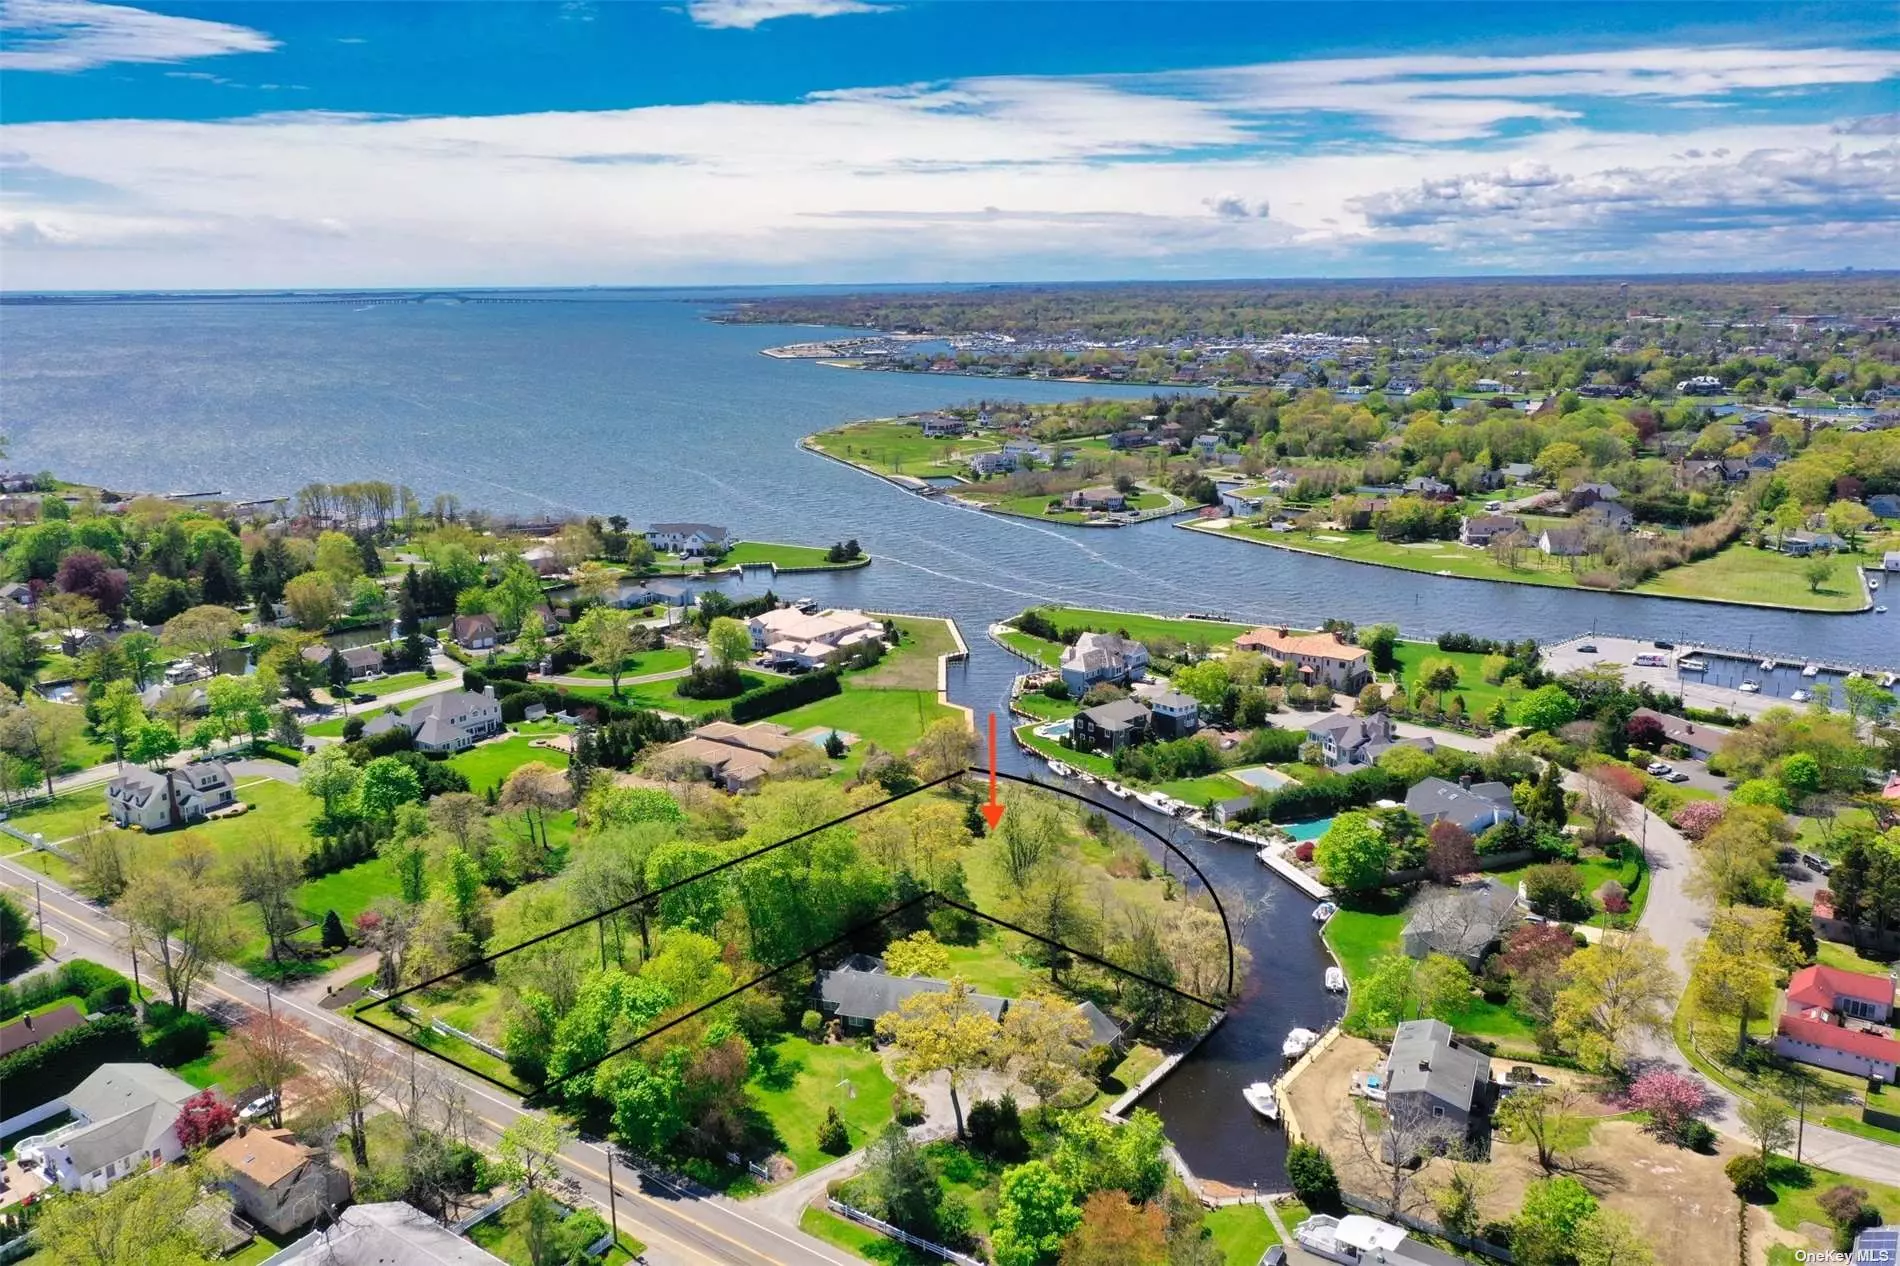 Build your Waterfront Dream home. 2 Acre Parcel with 146&rsquo; Road Frontage on a charming avenue in Islip. Property was once part of a larger estate that was used a summer residence in the late 1800&rsquo;s. w/ last remaining Carraige House 40&rsquo; x37&rsquo;. Beautifully appointed property with mature plantings originally designed by renowned landscape architect Fredrich Law Olmsted, known for designing Central Park. Just off The Great South Bay on The Great Cove. 330&rsquo; Canal front.